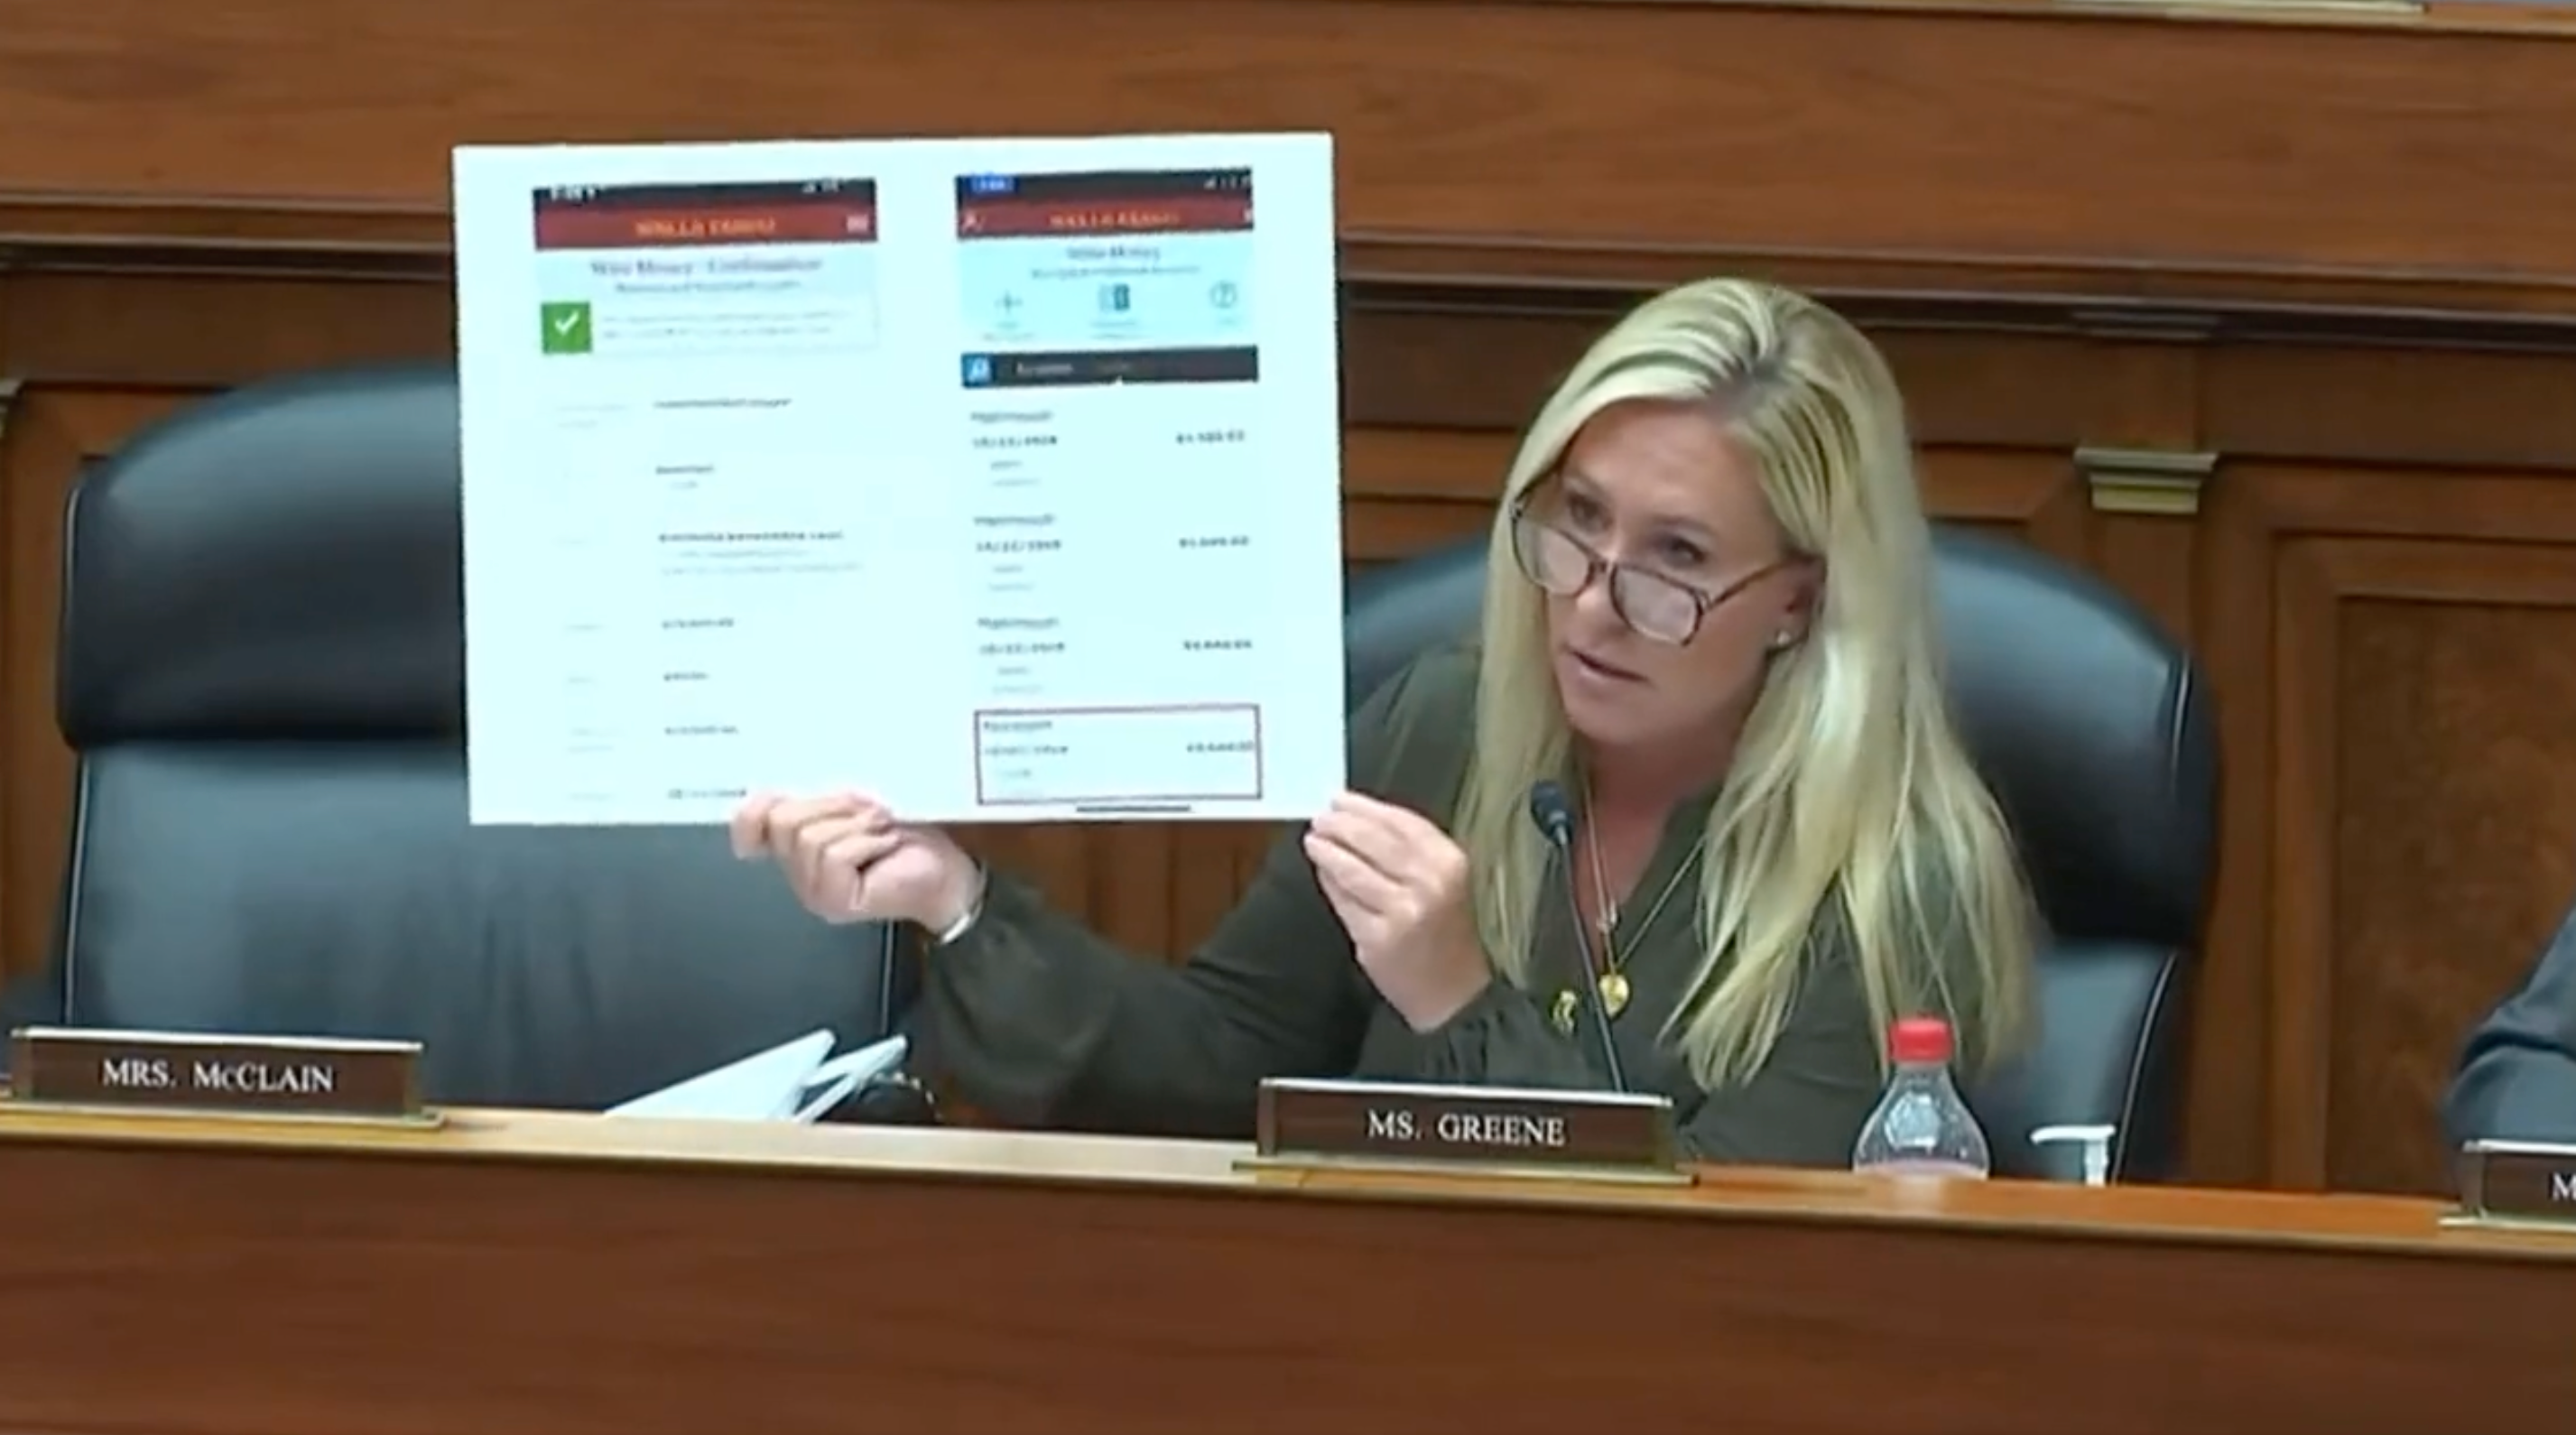 Marjorie Taylor Greene holds up picture boards related to Hunter Biden, some of which include naked photos